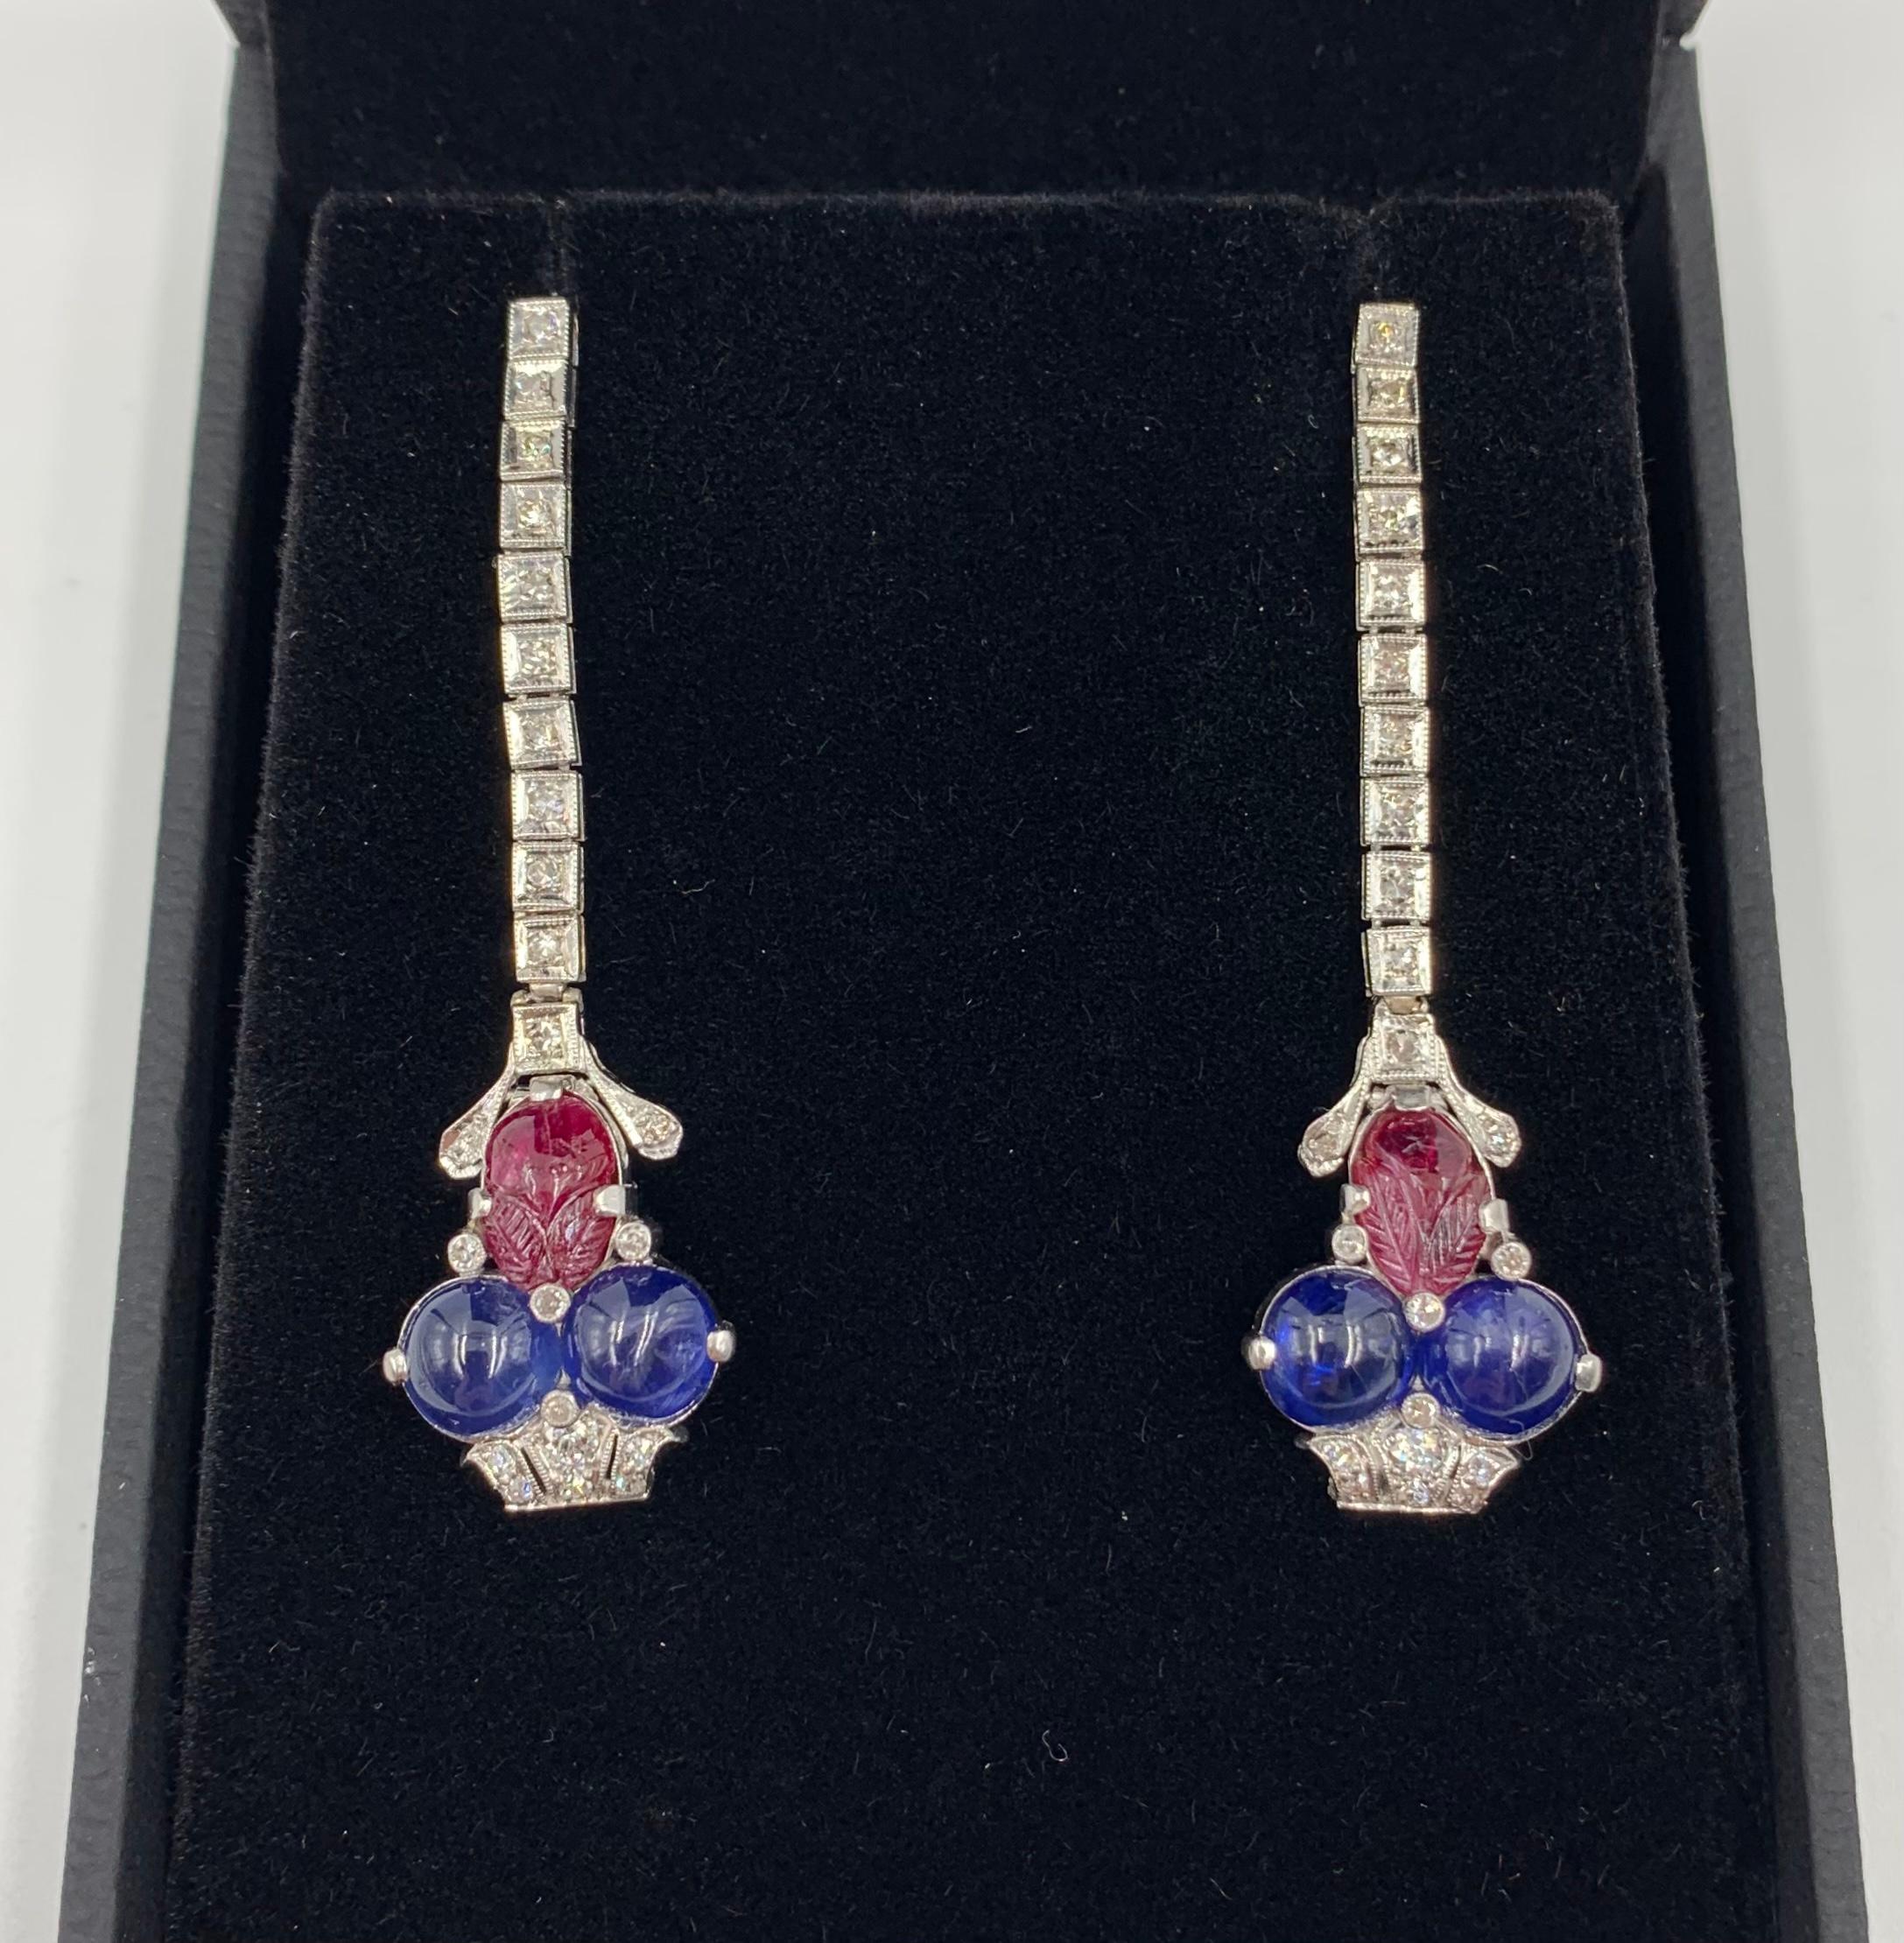 Exquisite Art Deco period Tutti Frutti diamond, cabochon sapphire, carved ruby platinum earrings.
Circa 1920
Each designed as a stylized diamond basket laden with large, luscious cabochon sapphire fruit with a beautifully carved ruby leaf on an